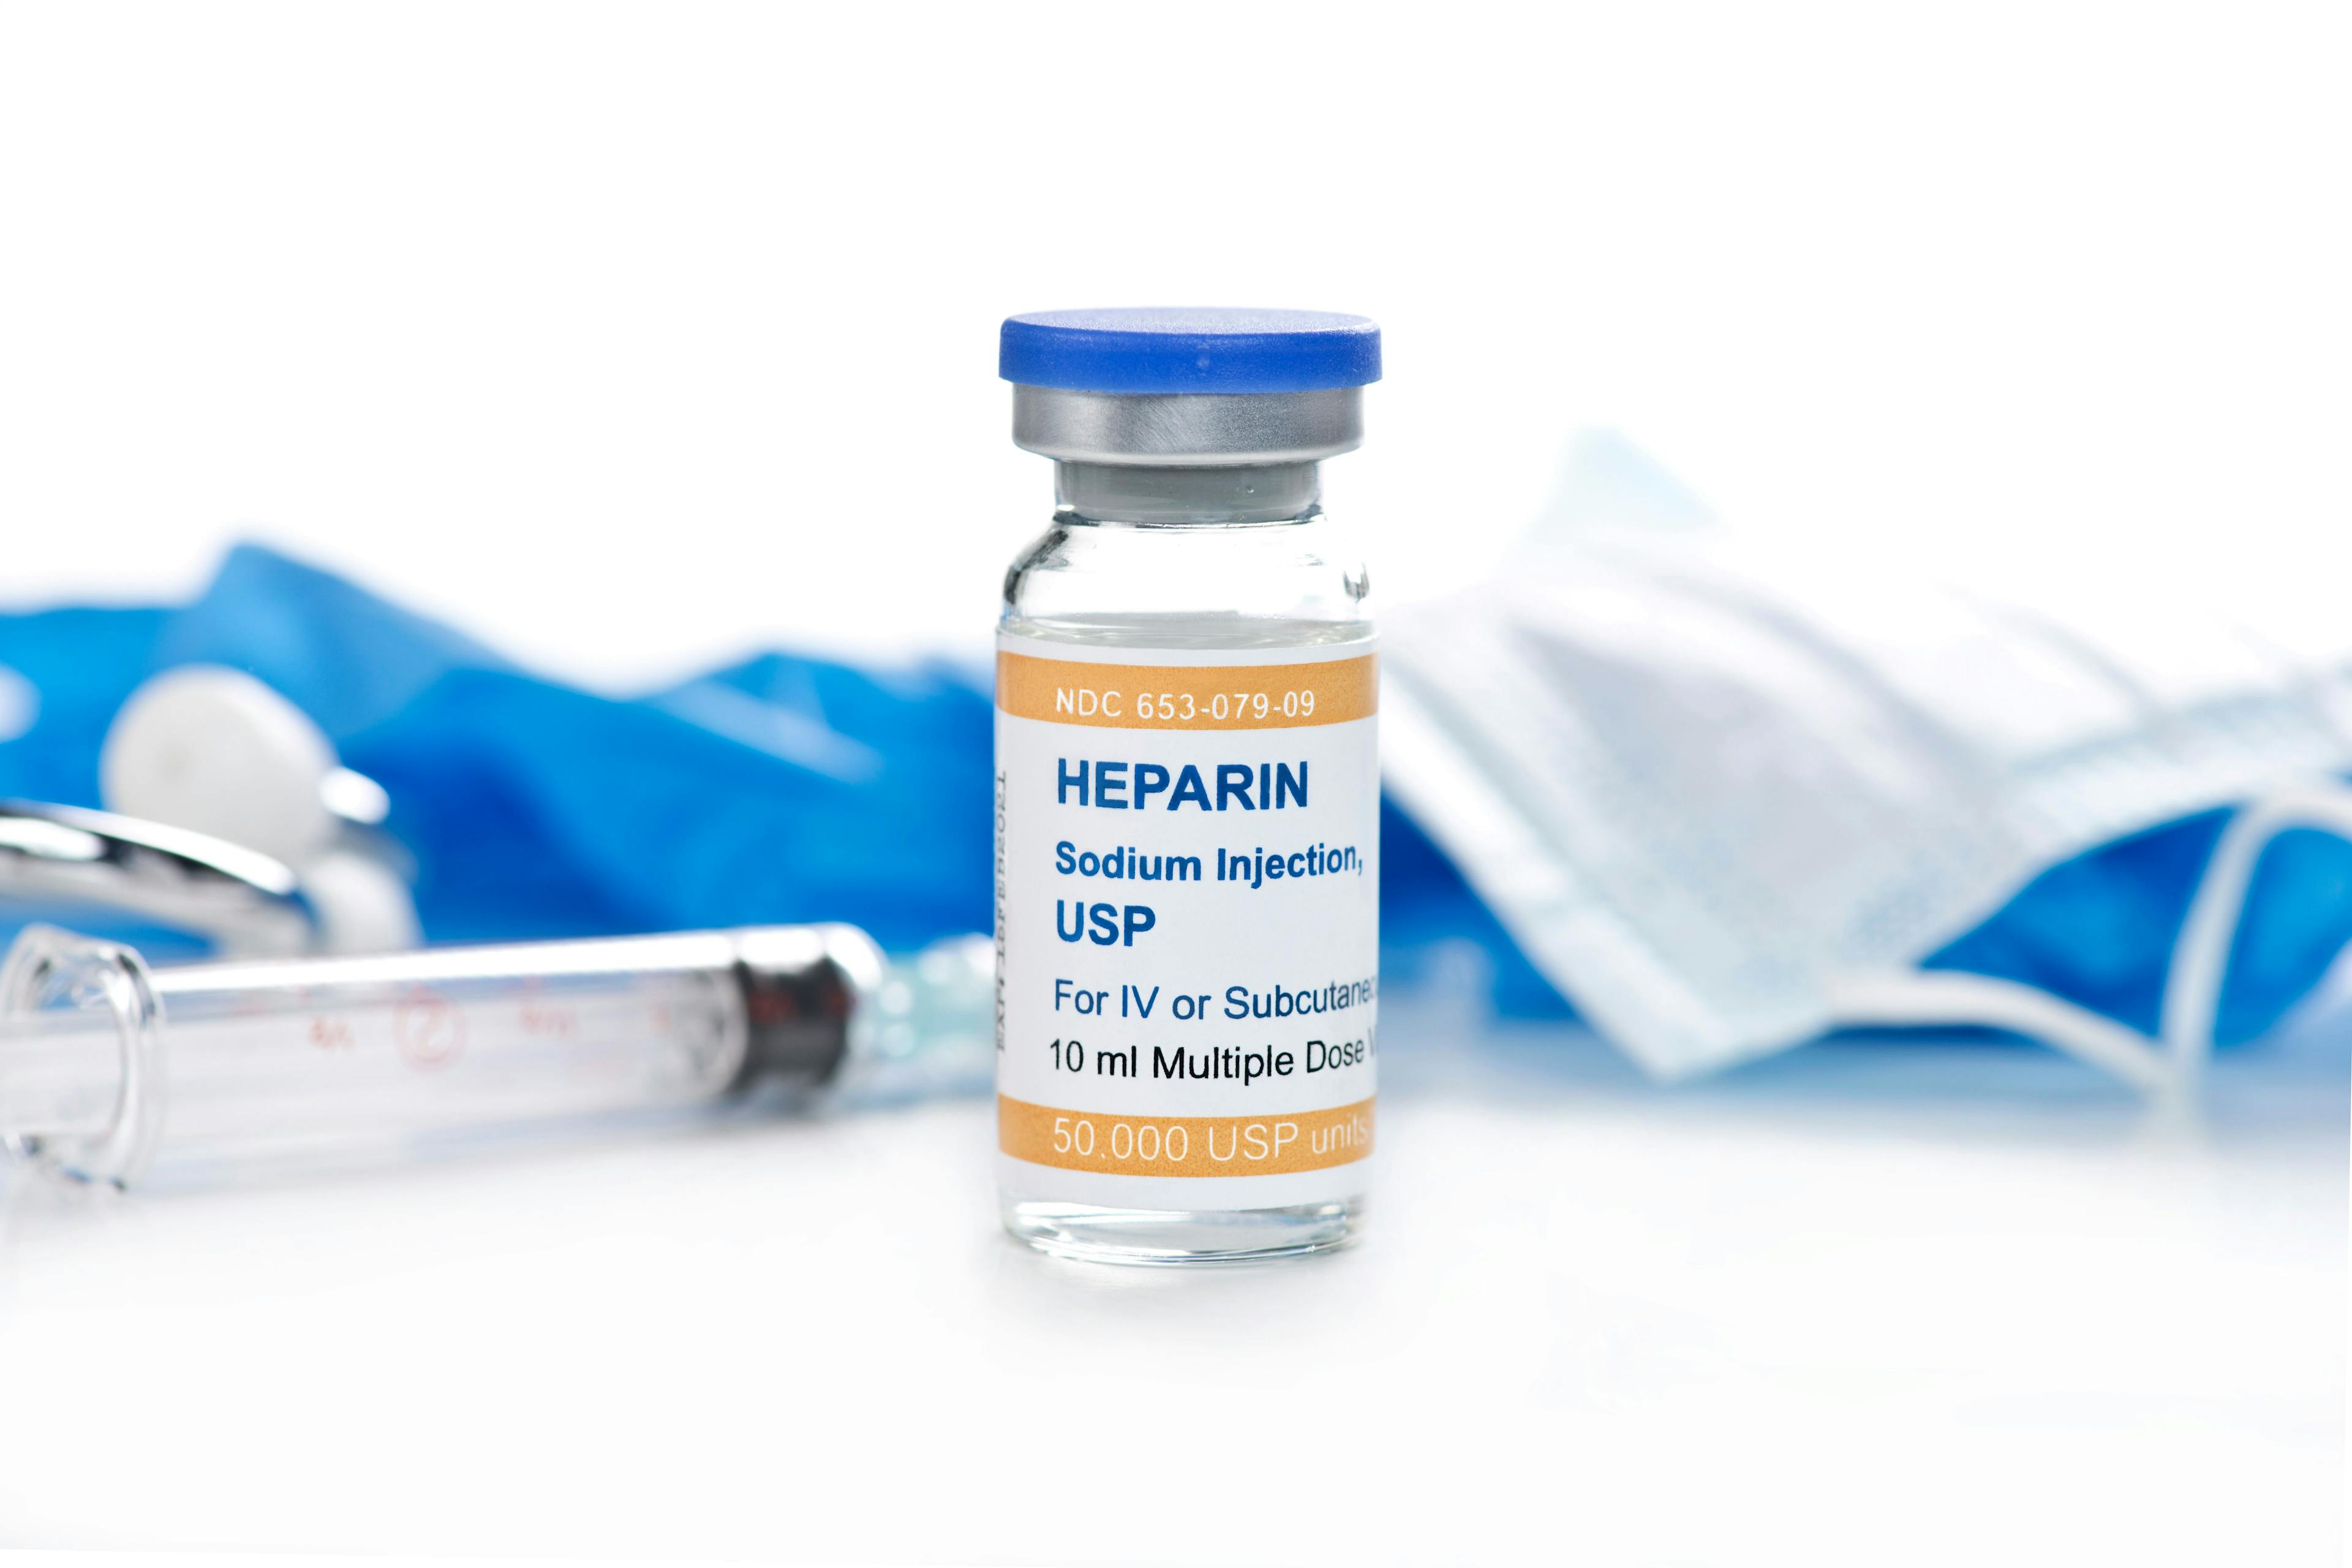 Heparin Sodium injection Vial | Image Credit: © Sherry Young - stock.adobe.com